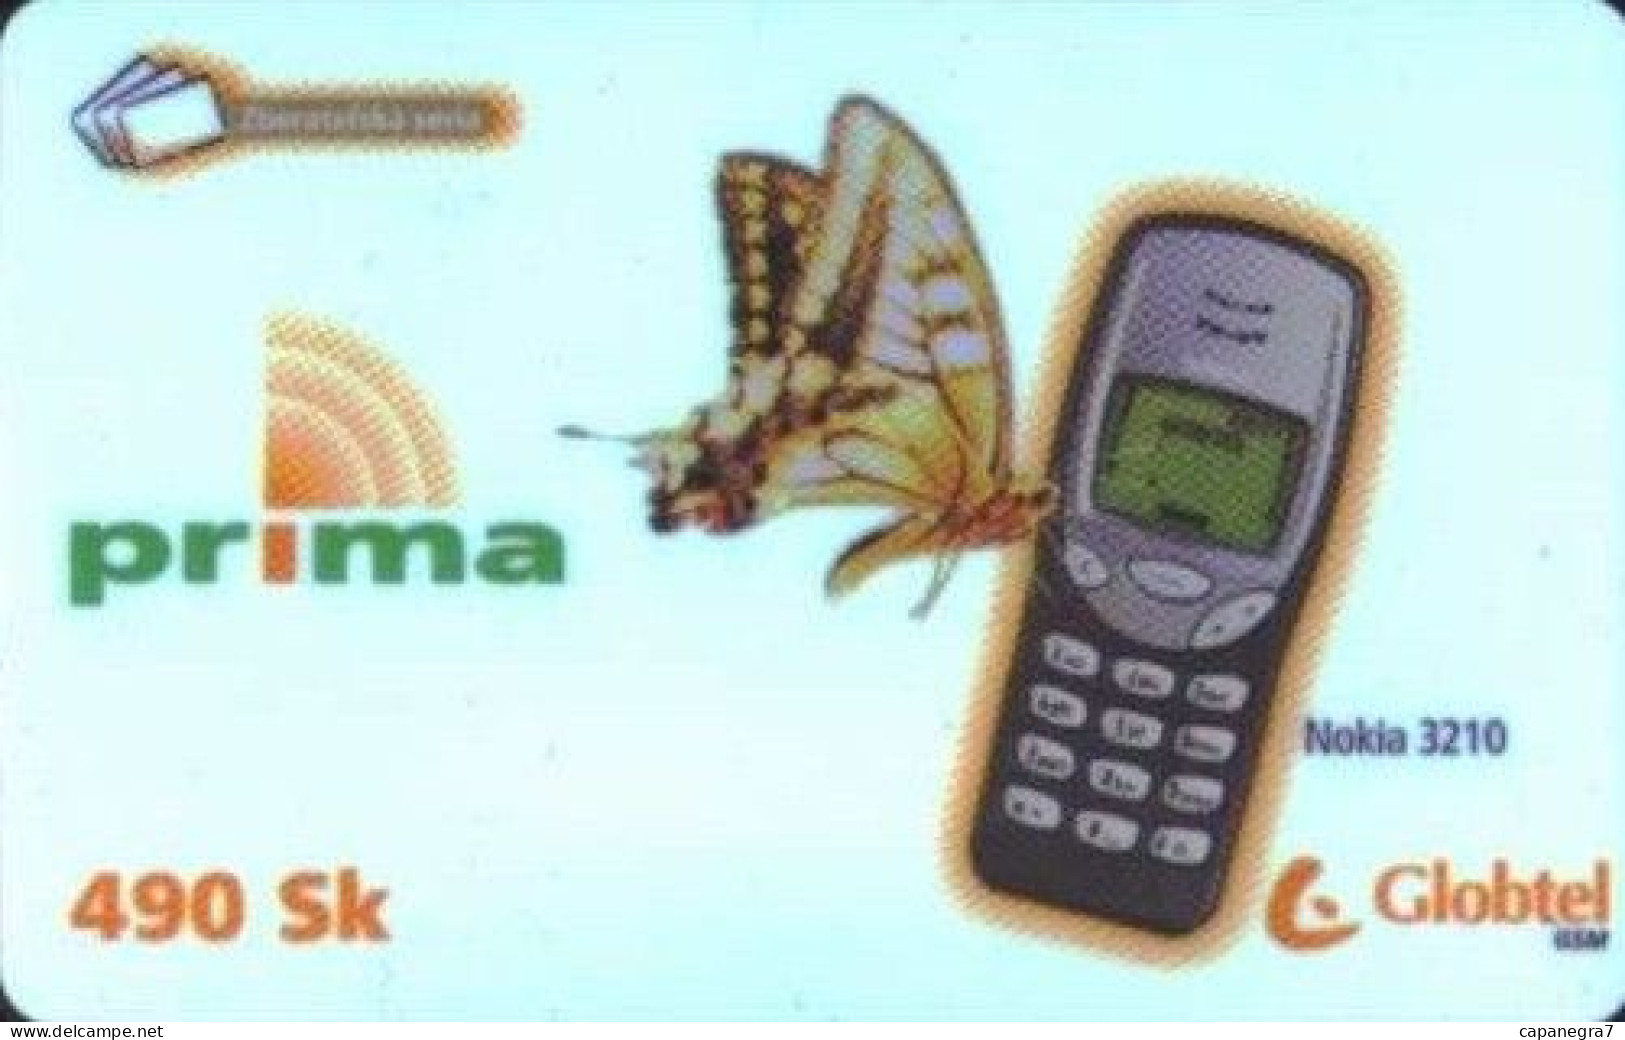 Telephone Nokia 3210, Globtel GSM Slovakia, Valid 31.08.2001, PIN Code About 28 Mm Long And About 2.3 Mm High, Slovakia - Slowakei